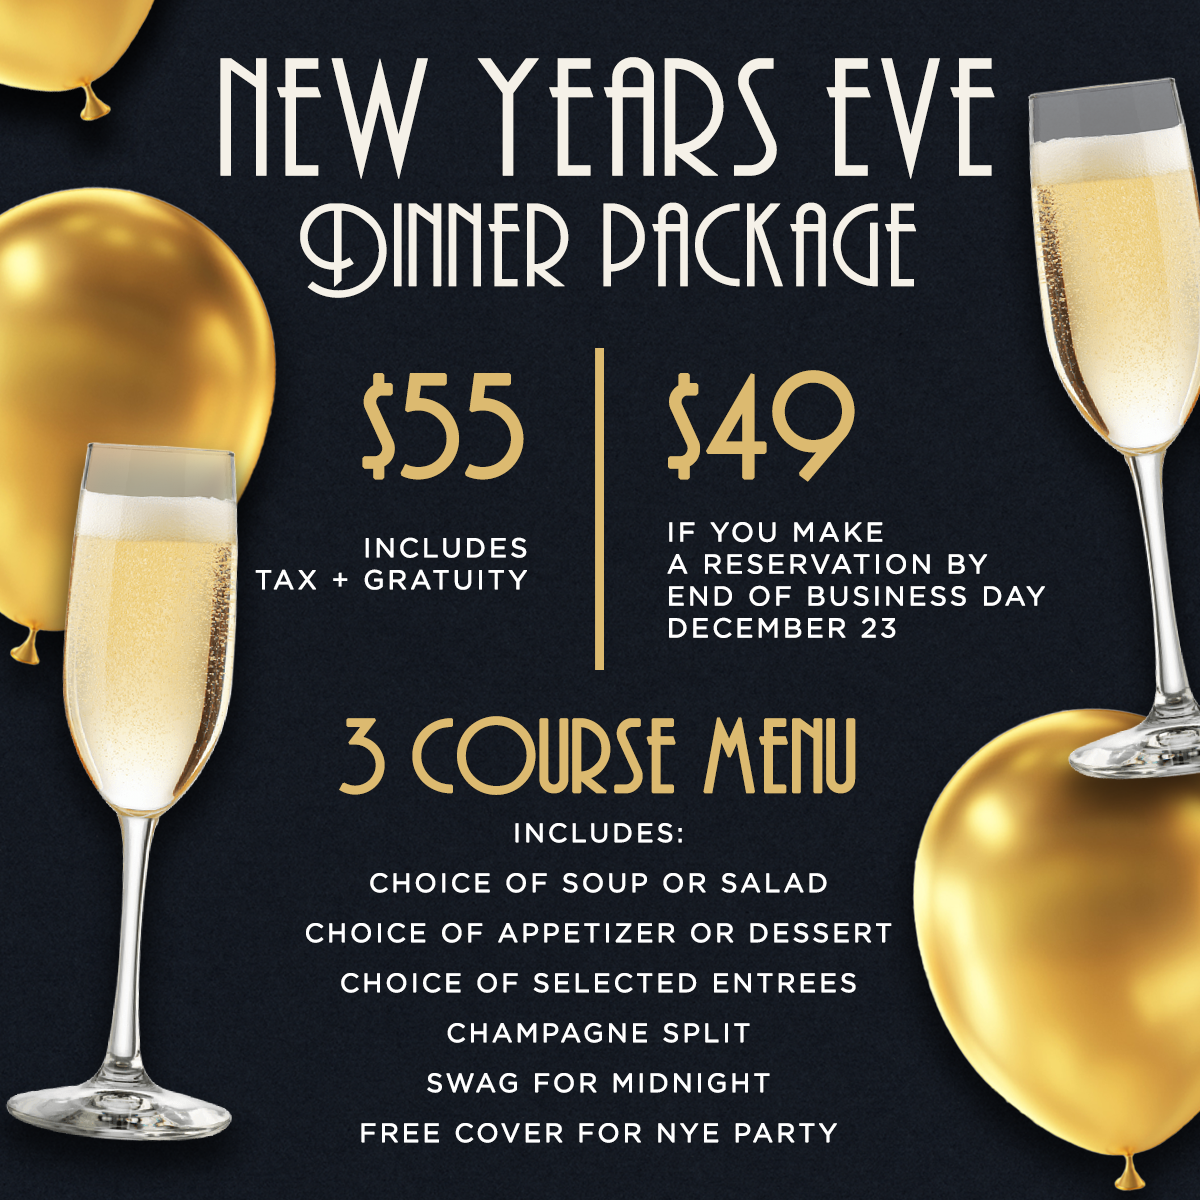 New Years Eve New York Packages Photos